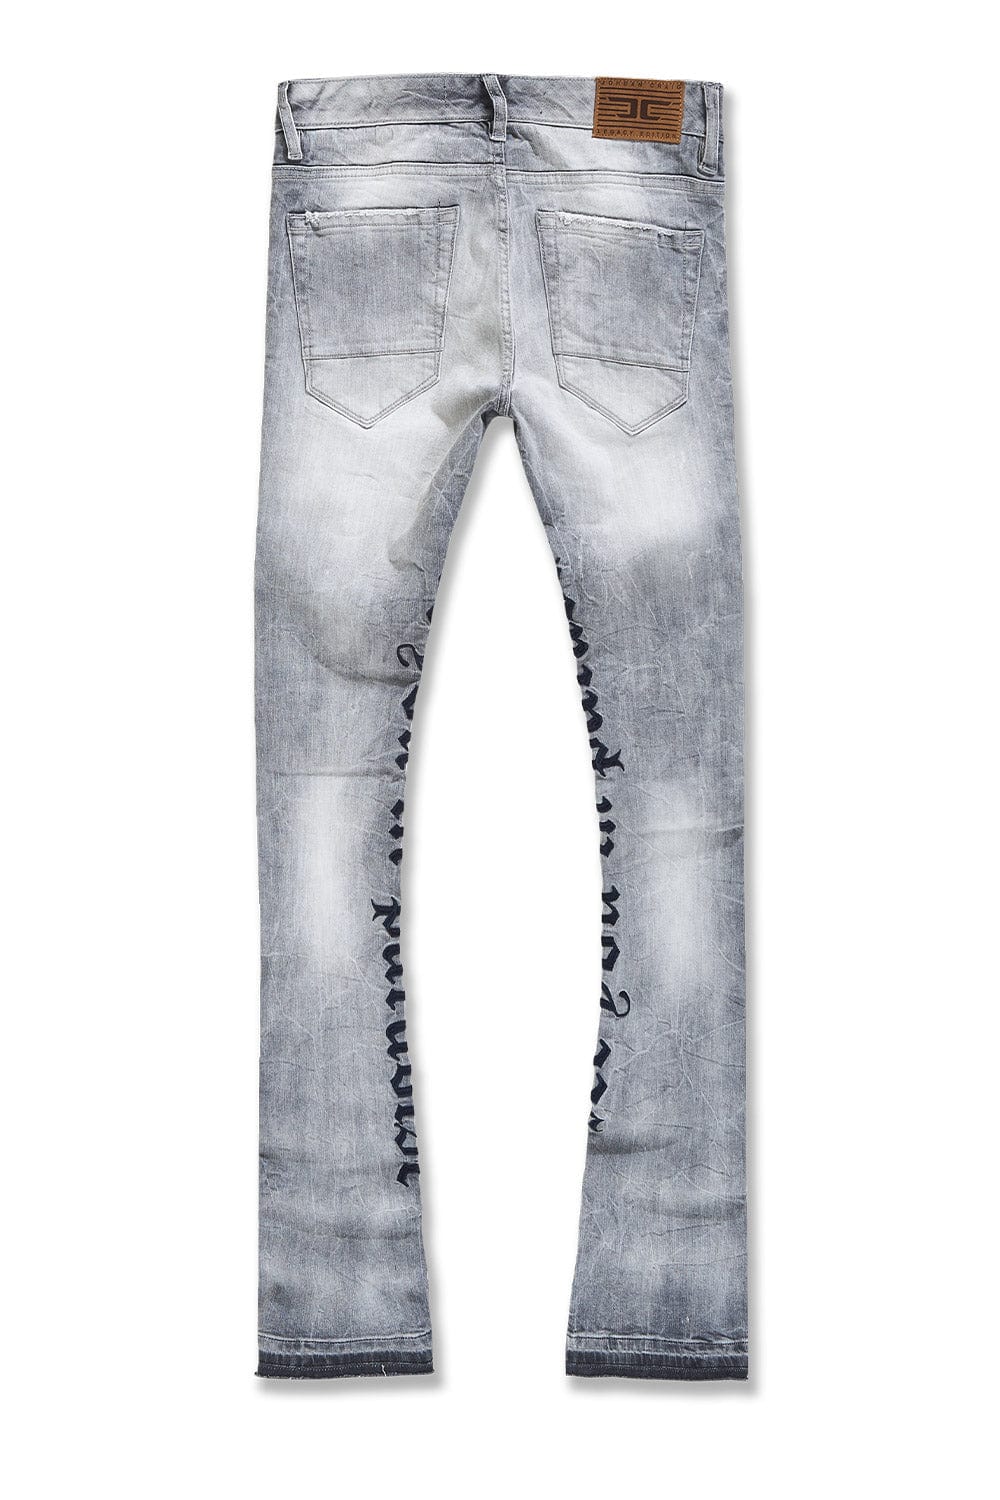 Jordan Craig Martin Stacked - See You In Paradise Denim (Cement)